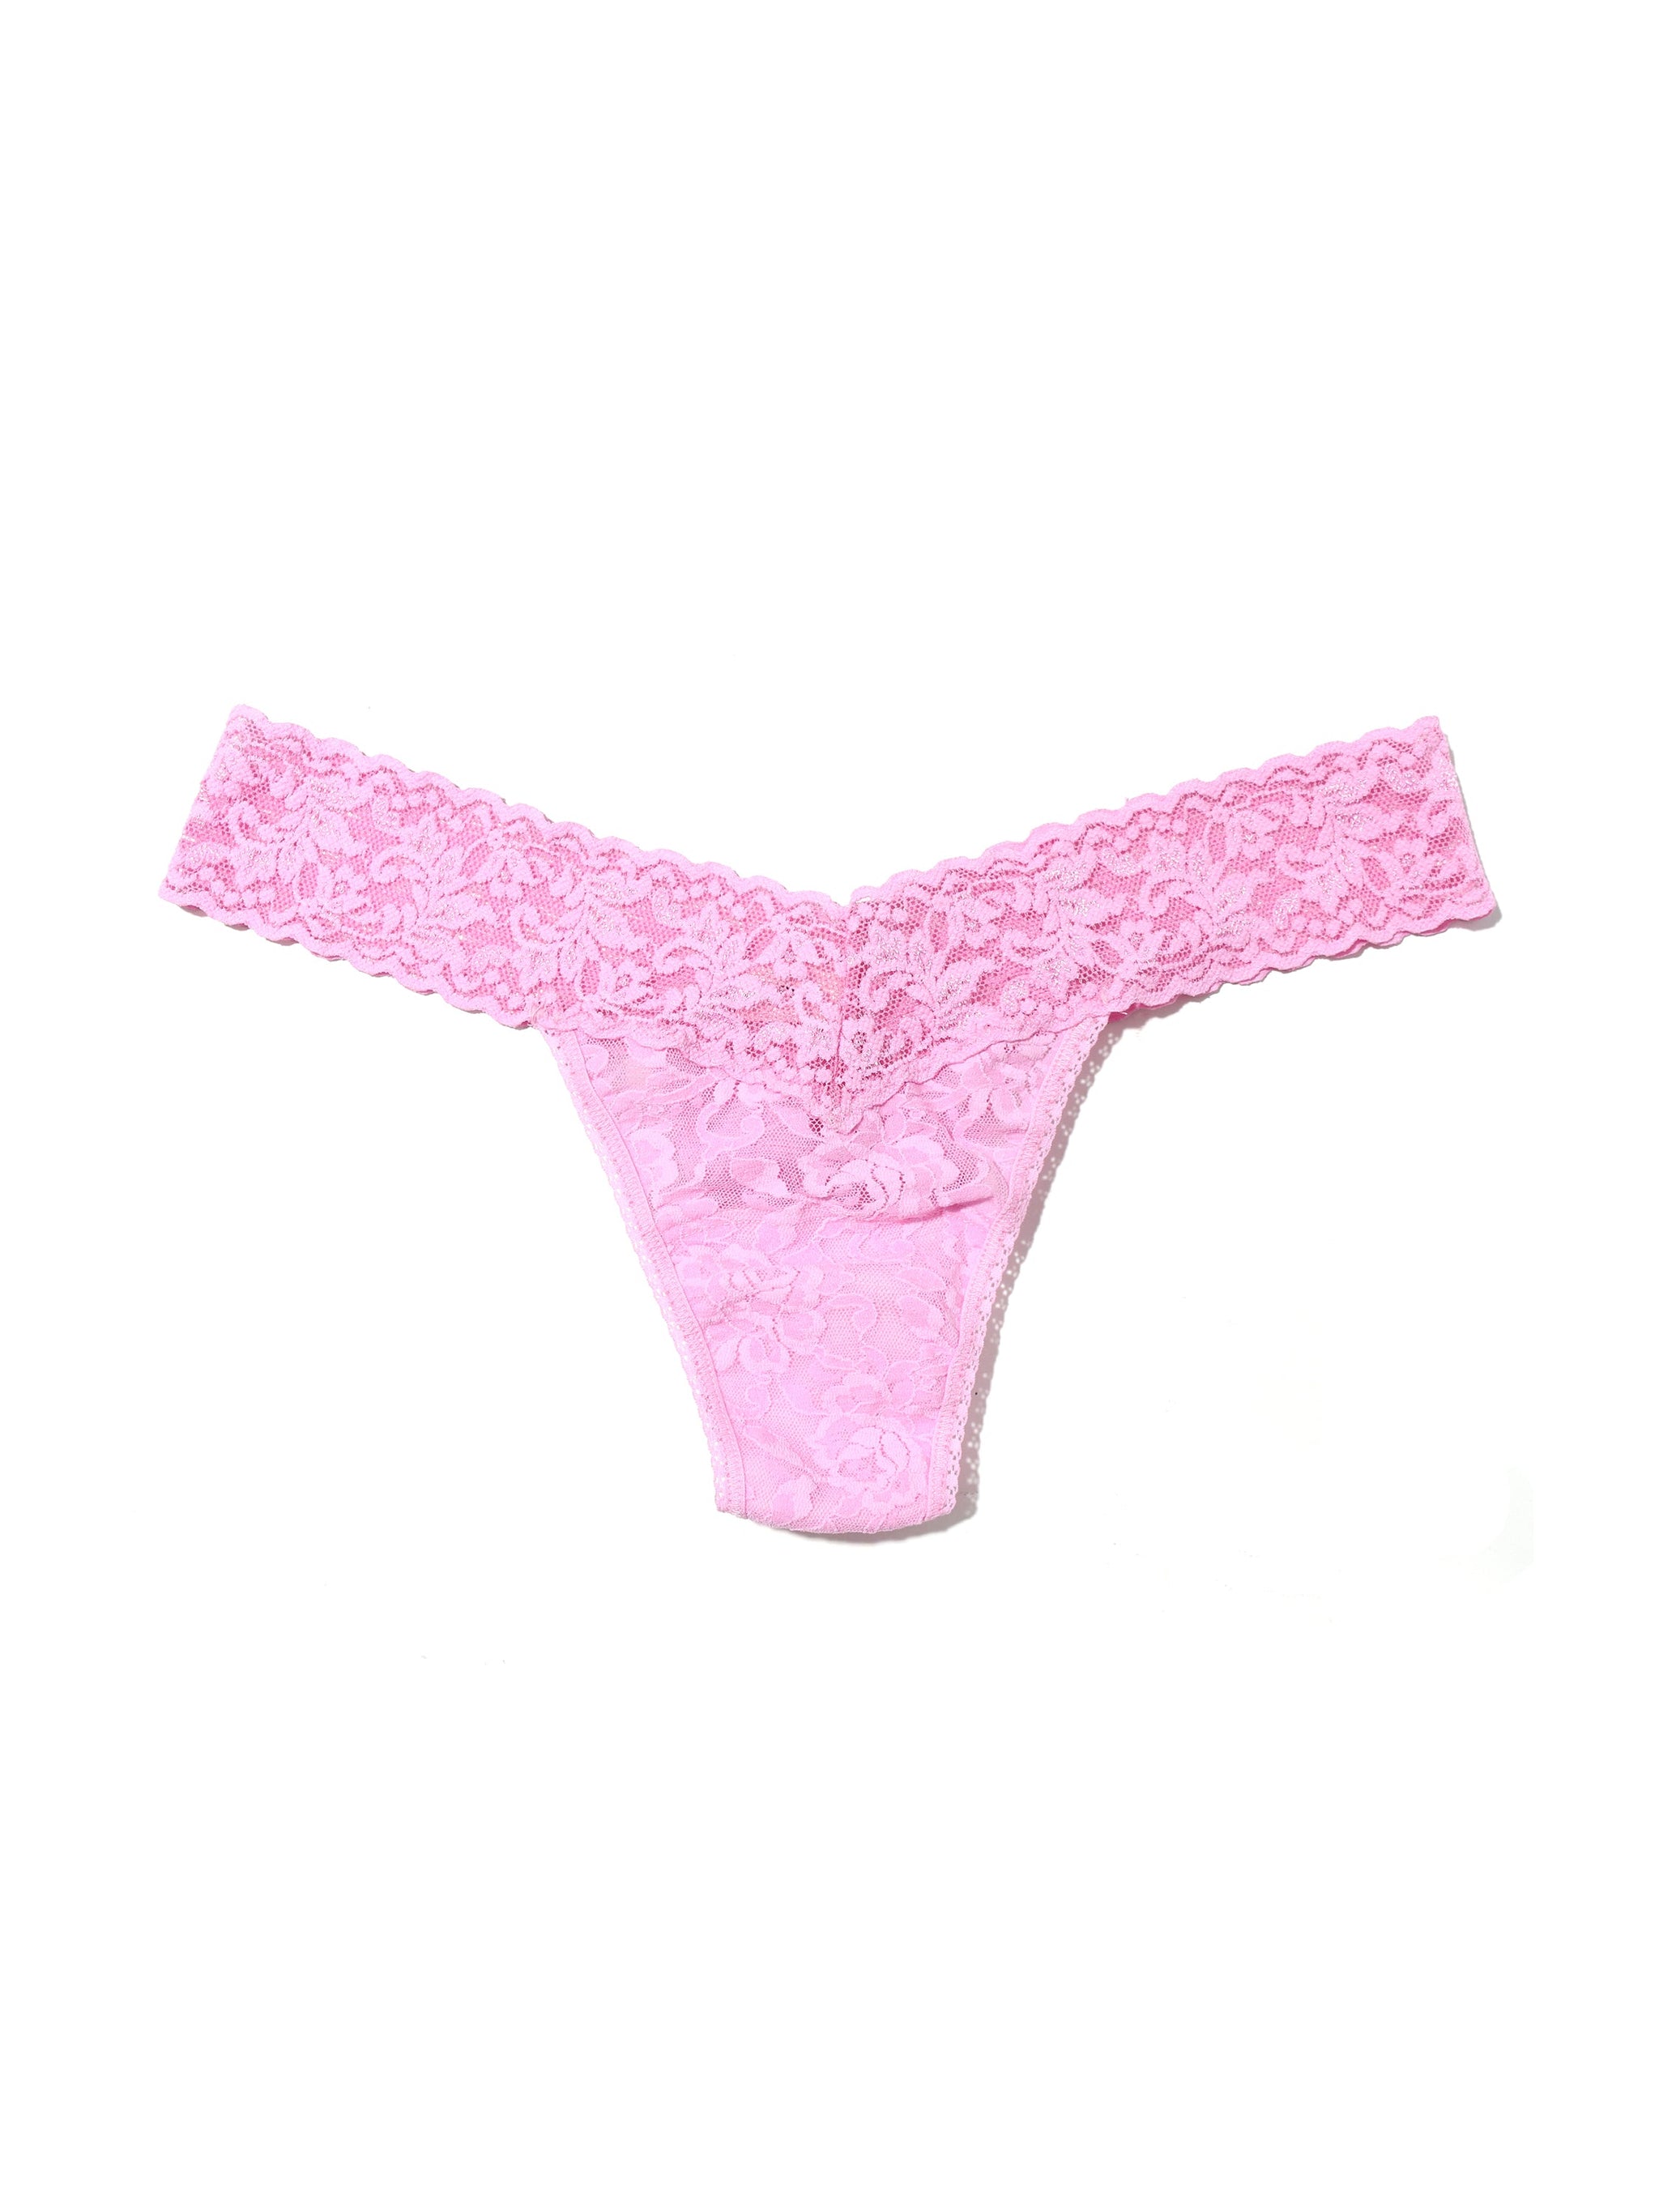 Signature Lace Low Rise Thong Cotton Candy Pink